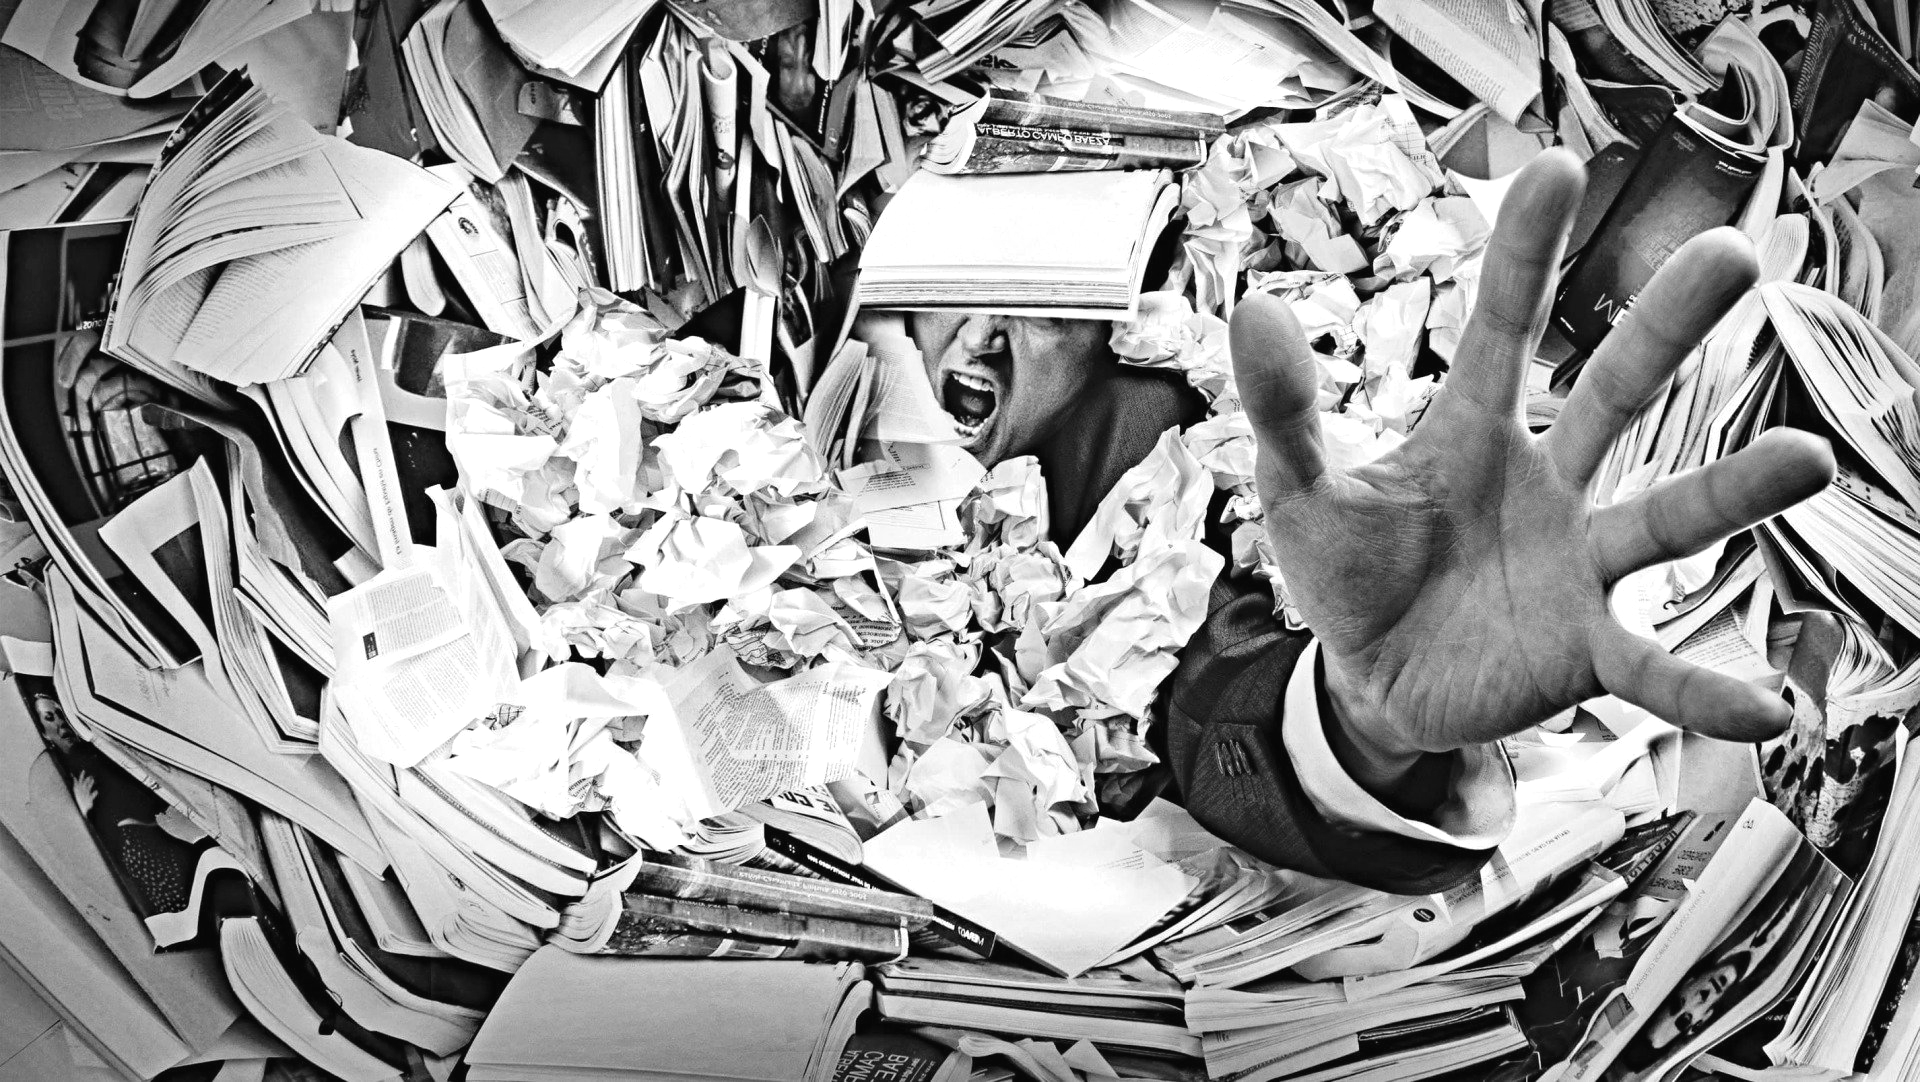 A man in a suit drowning in paper and books, reaching a hand up for help before he goes under